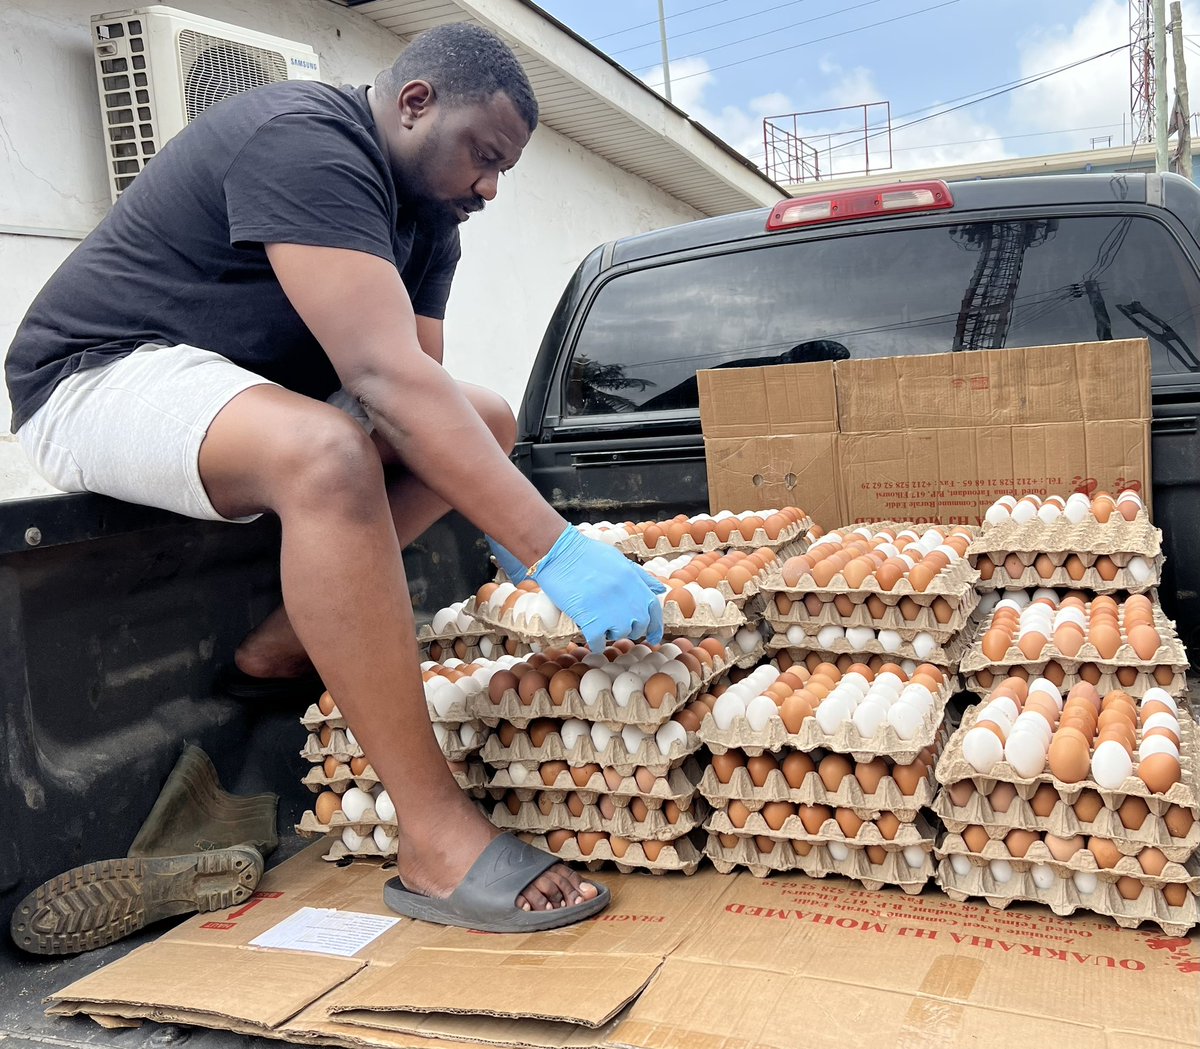 My fresh eggs arrived yesterday from the farm. Sold out within minutes. God is Good! Next batch will be ready next week Monday. #AgricisGold